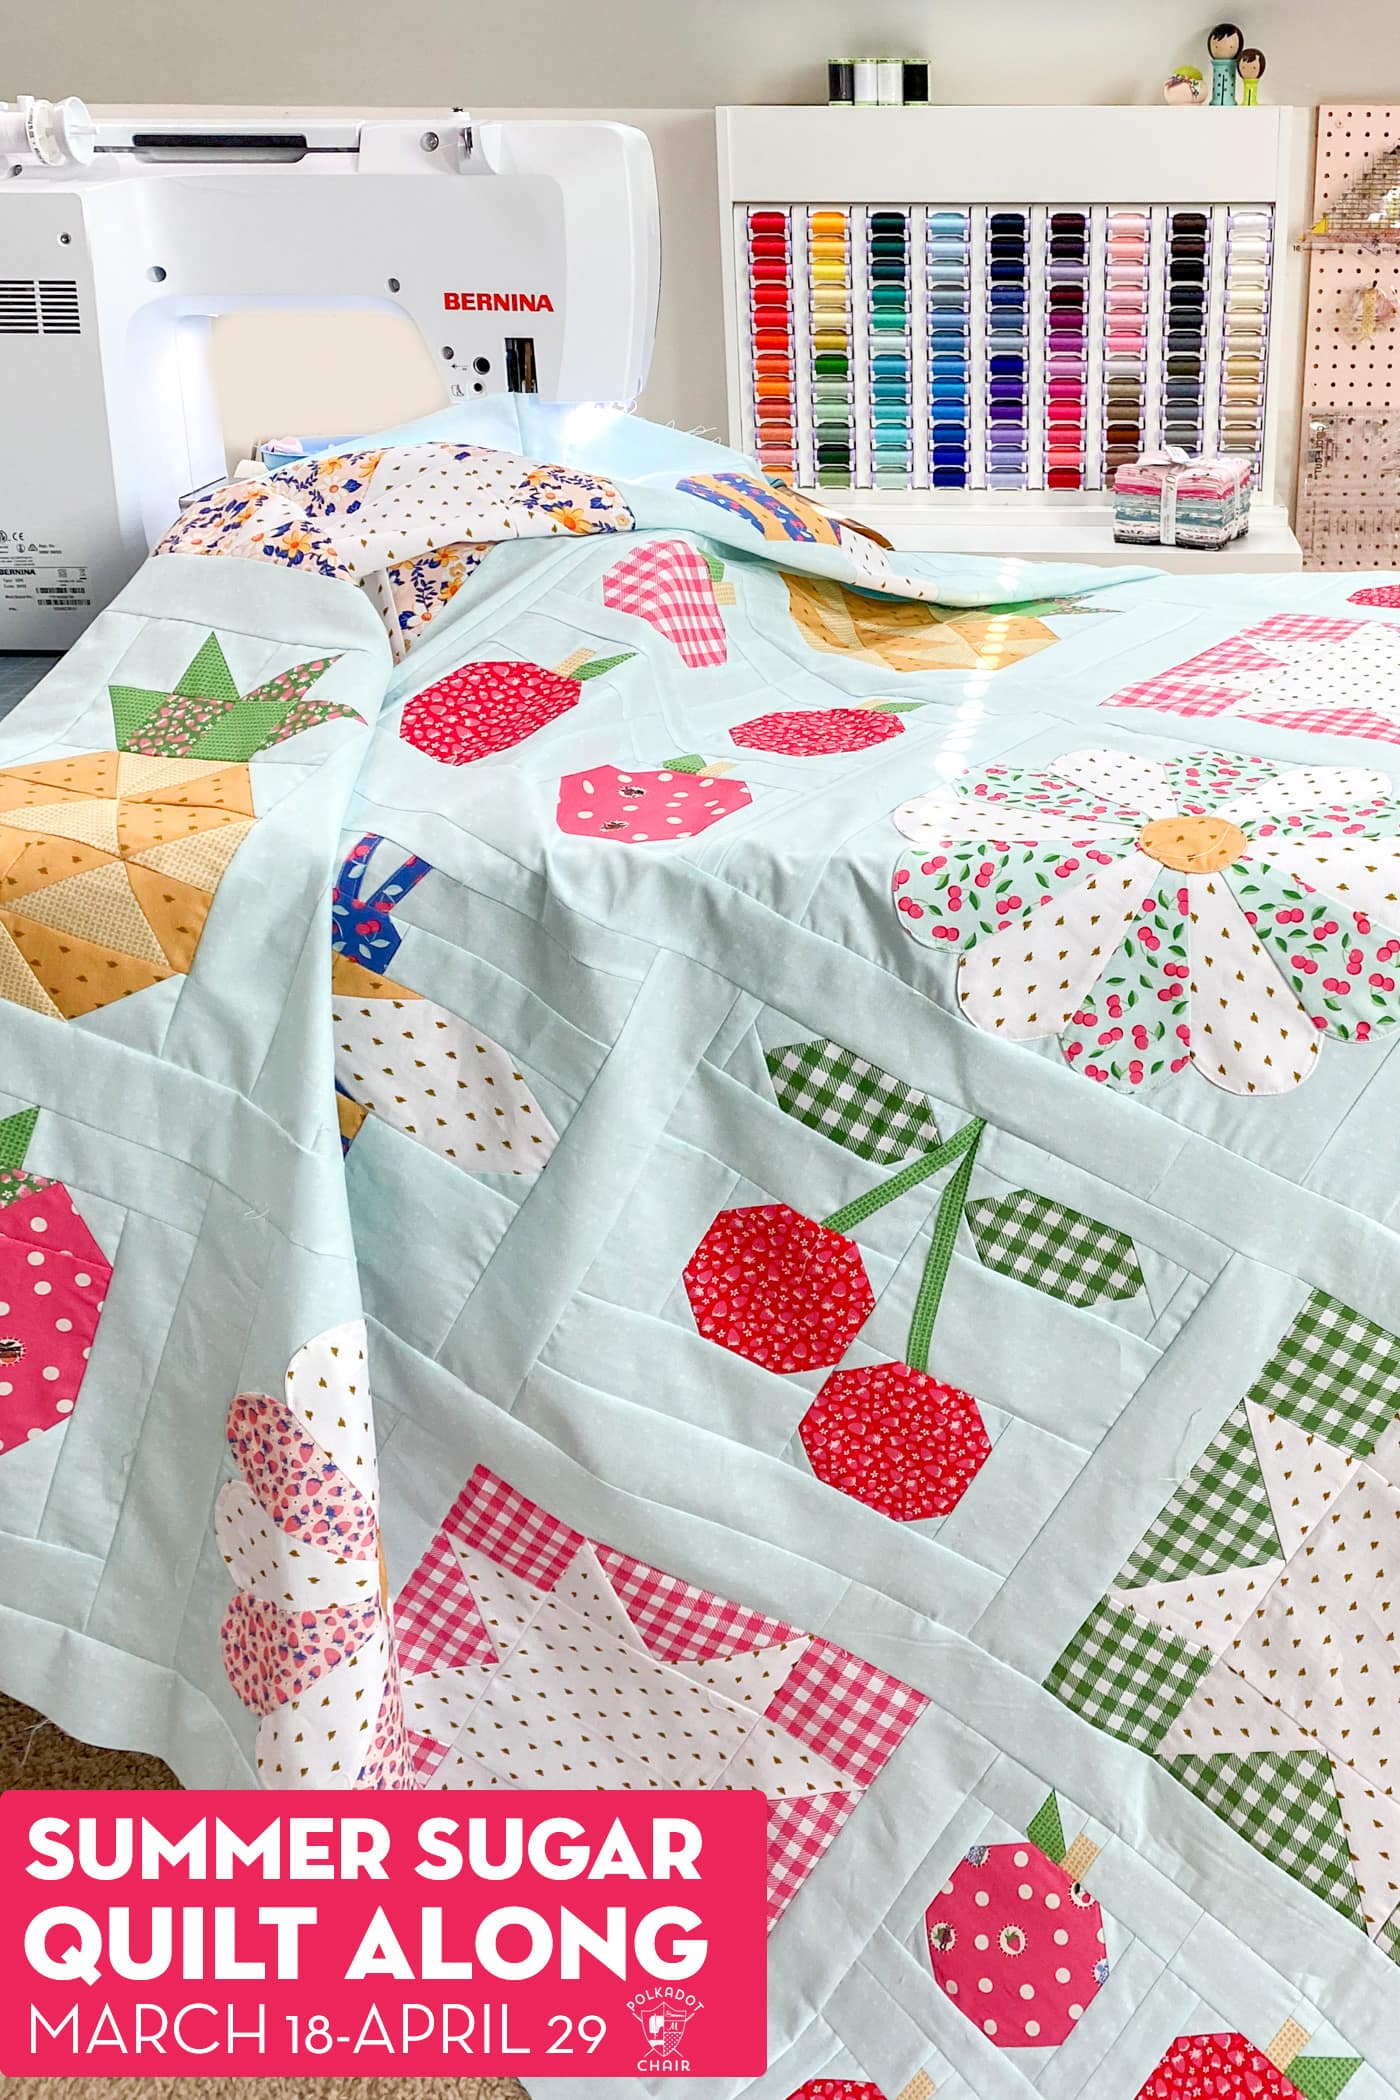 Join Us for the Summer Sugar Quilt Along!